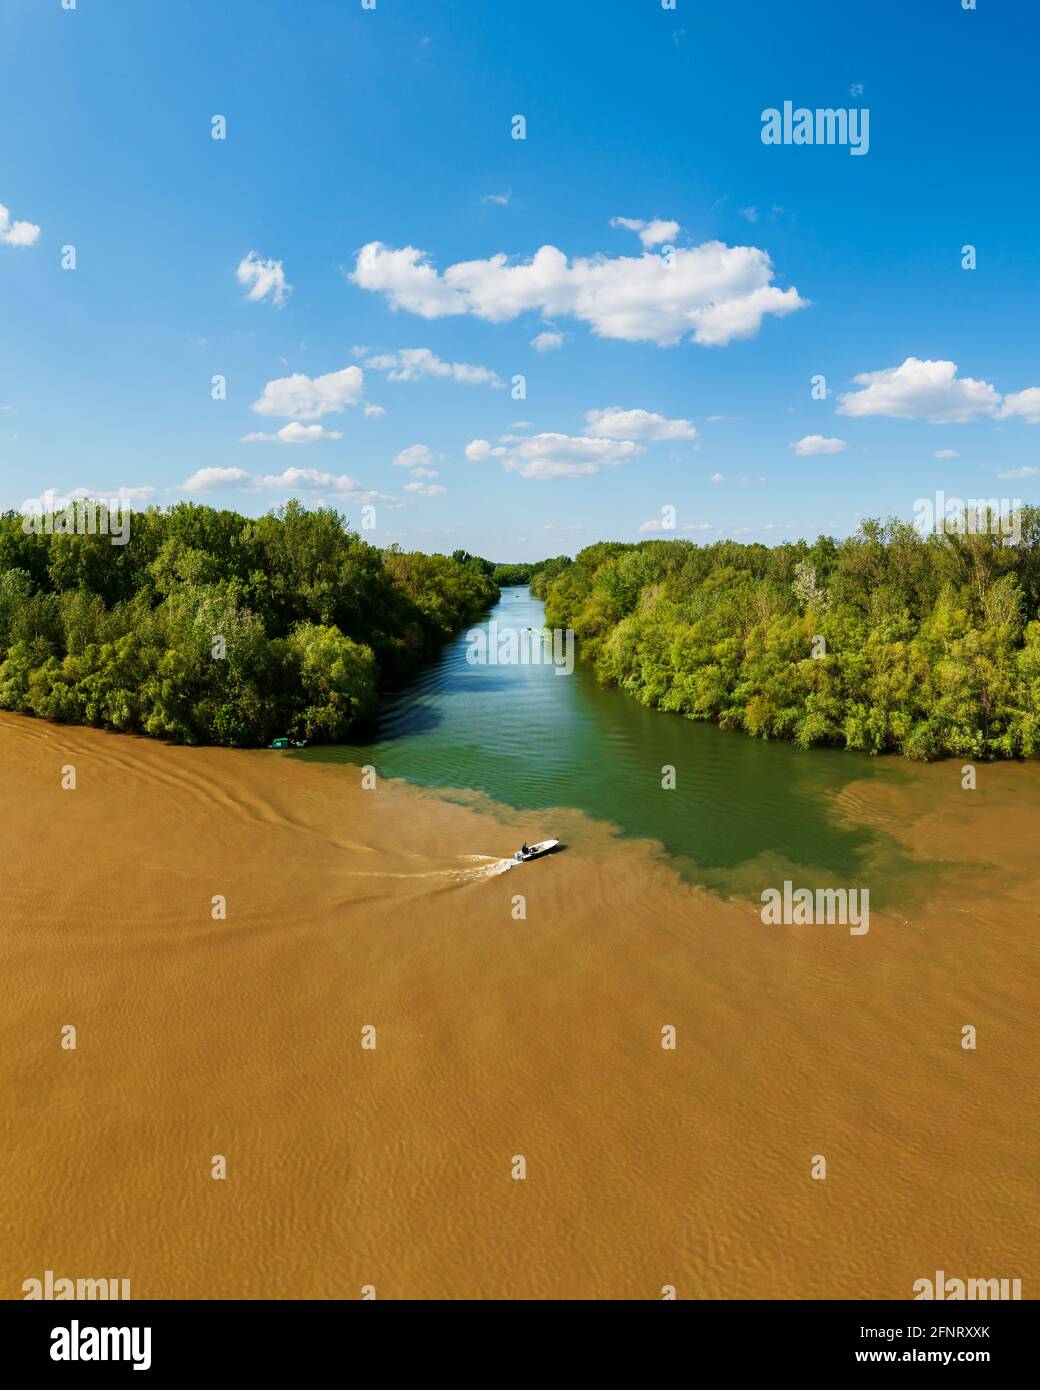 Tisza and Koros River estuary. It has amazing water mixing texture photo with a boat in spring time. Stock Photo